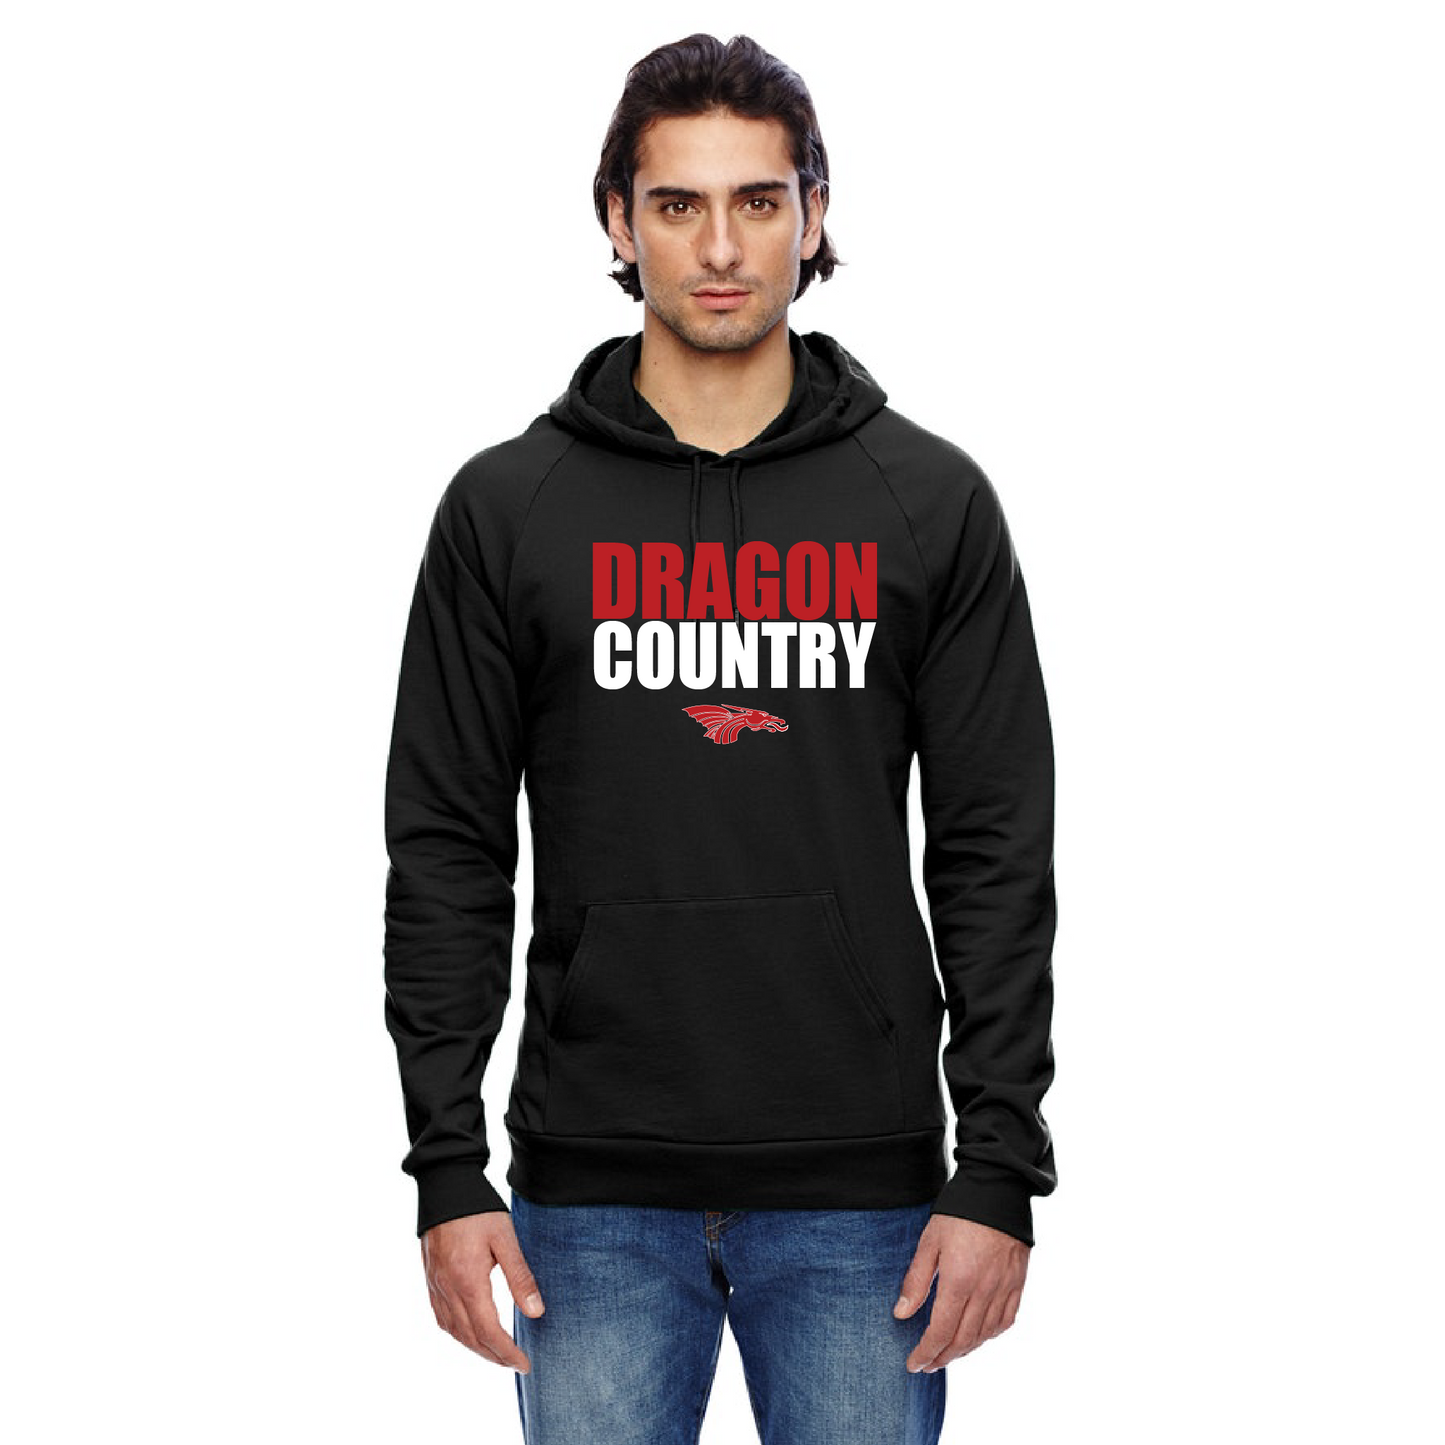 Unisex Hoodie - Dragon Country